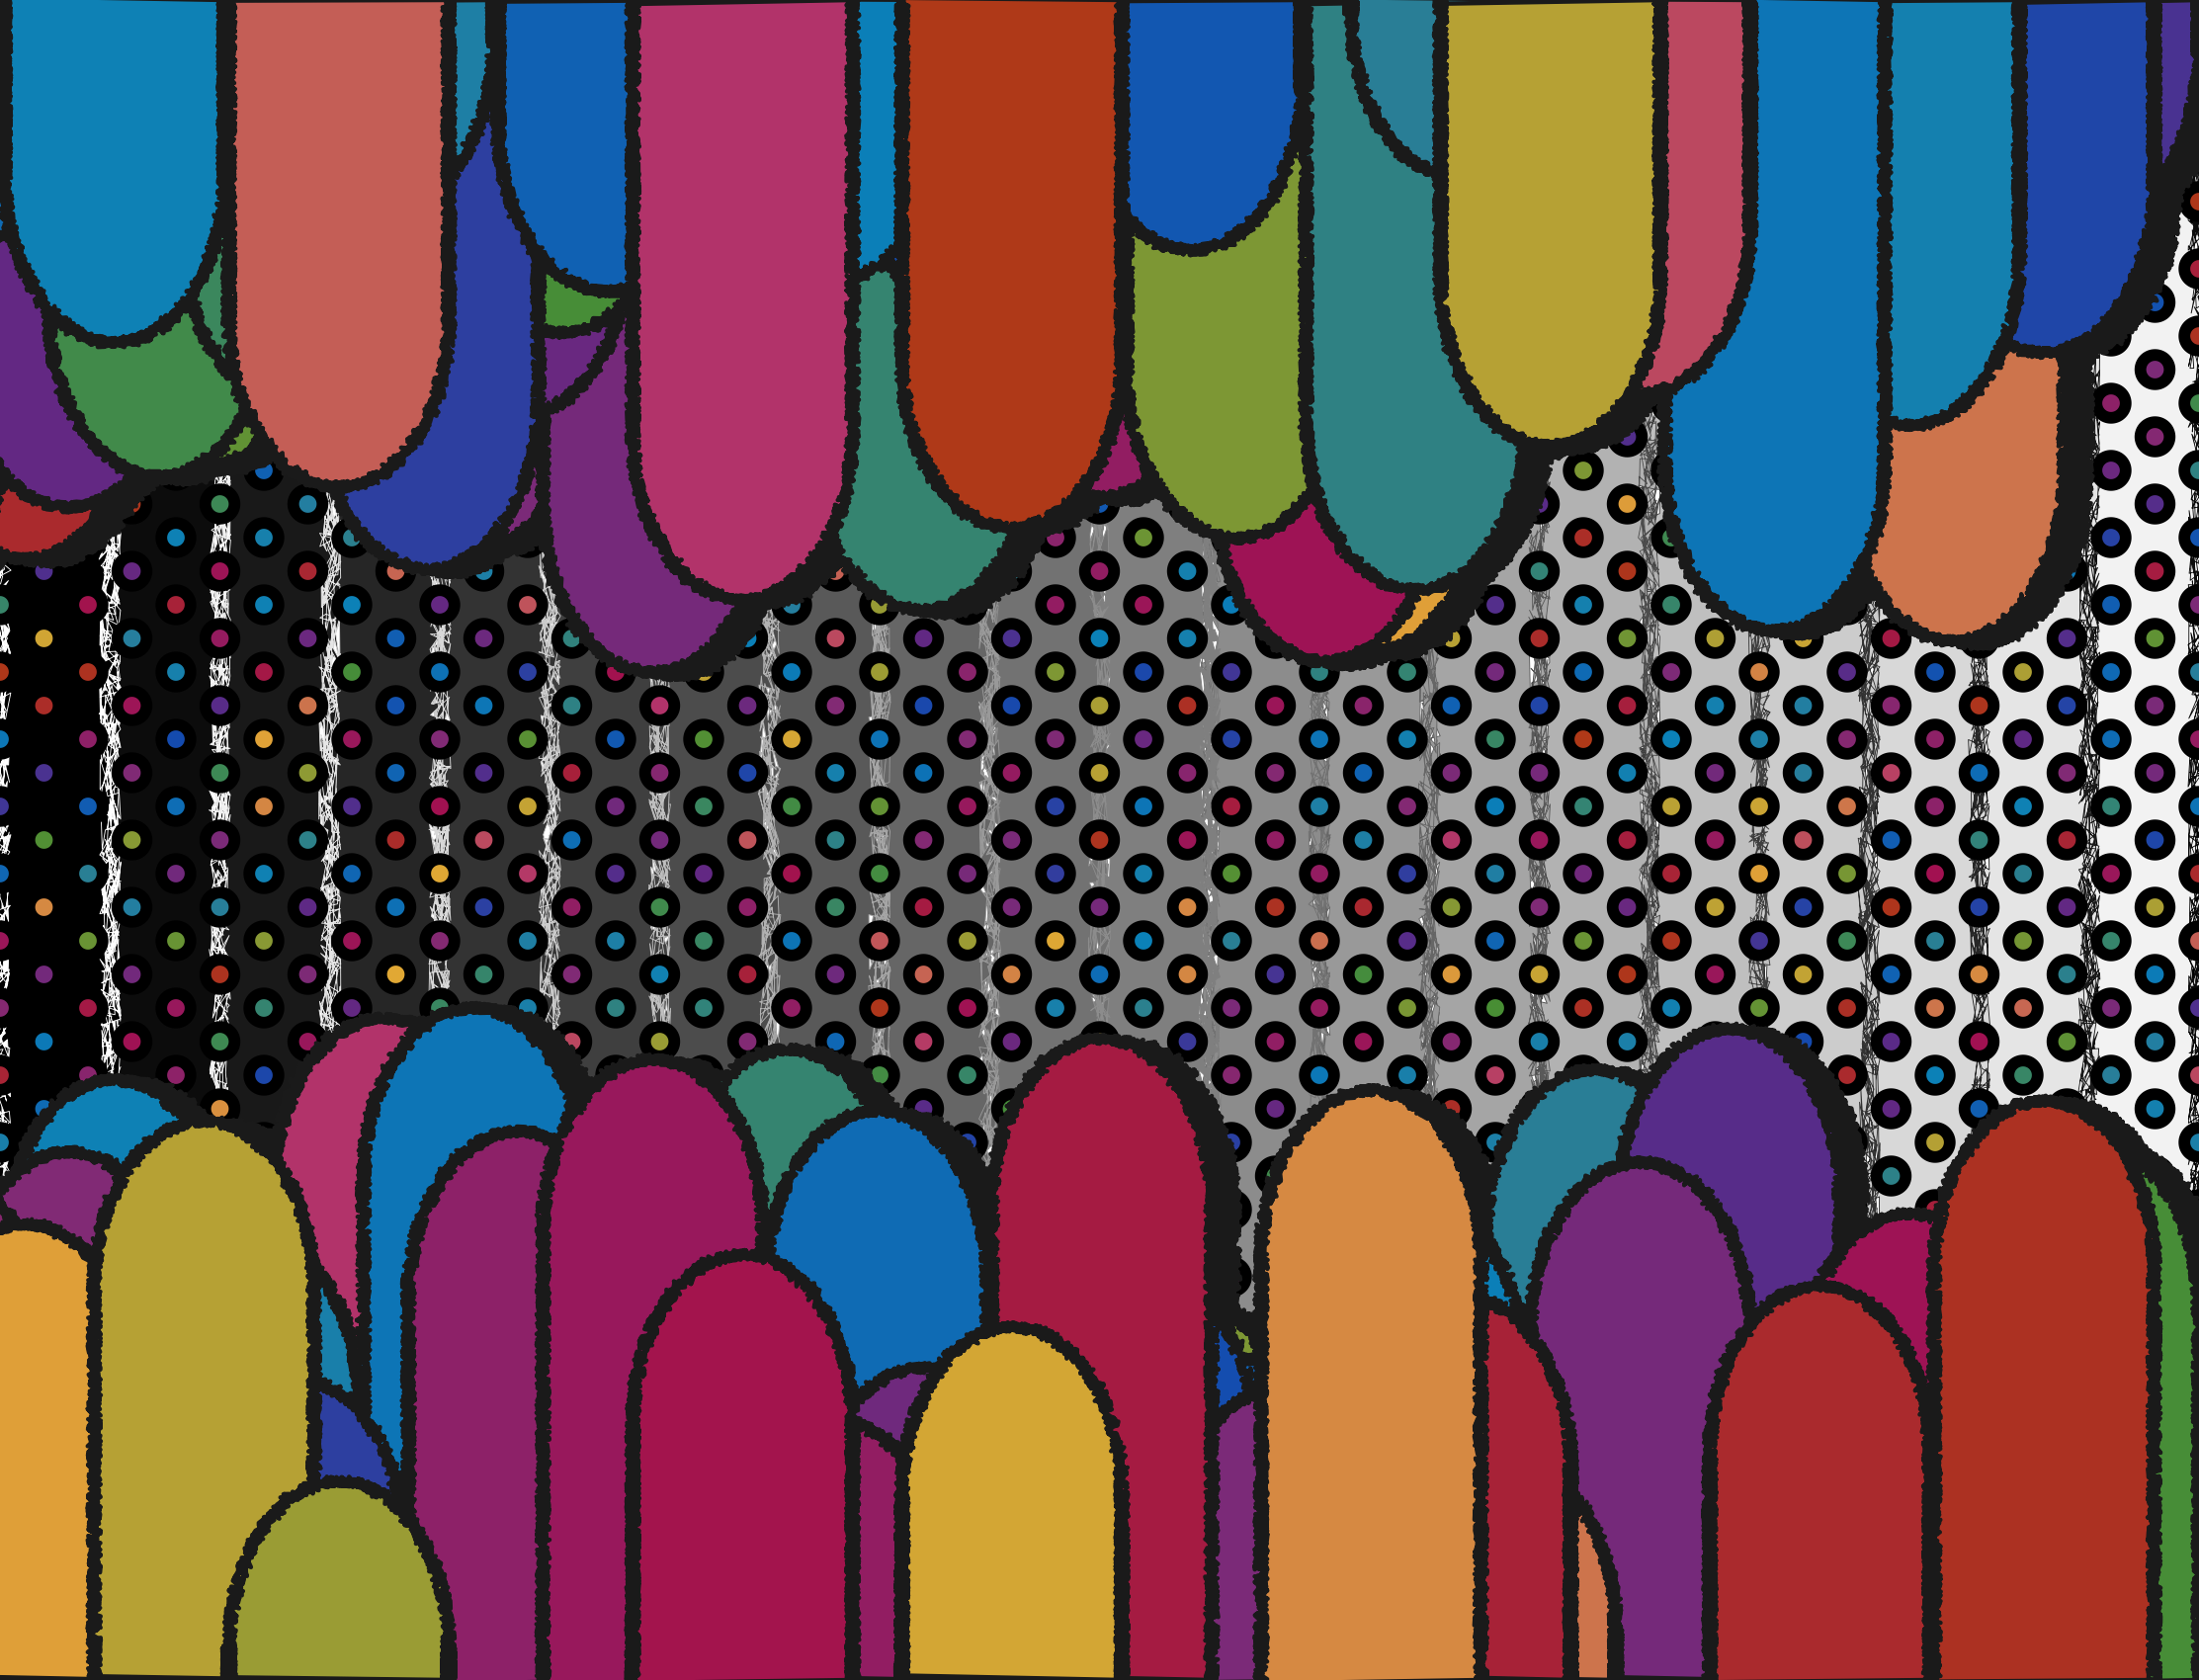 A generative image with multiple rainbow finger-like shapes dropping from the top and rising from the bottom on a black and white gradient and rainbow-colored polka dots.